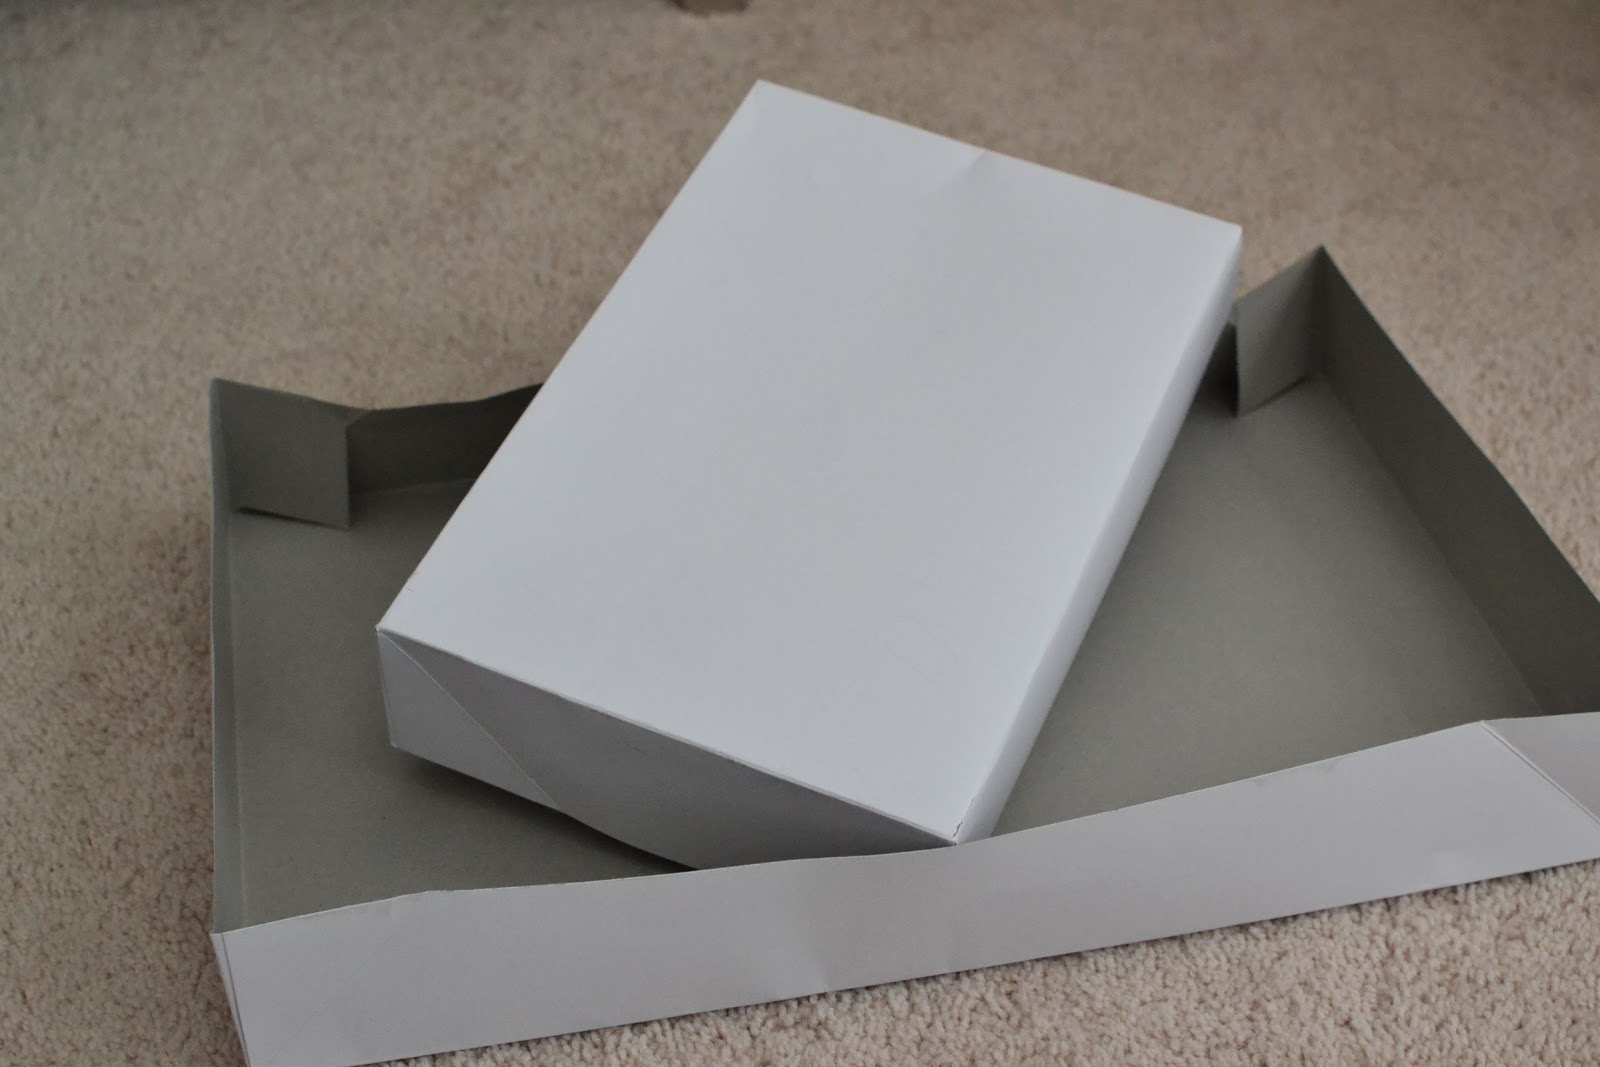 How To Make A Gift Box Smaller
